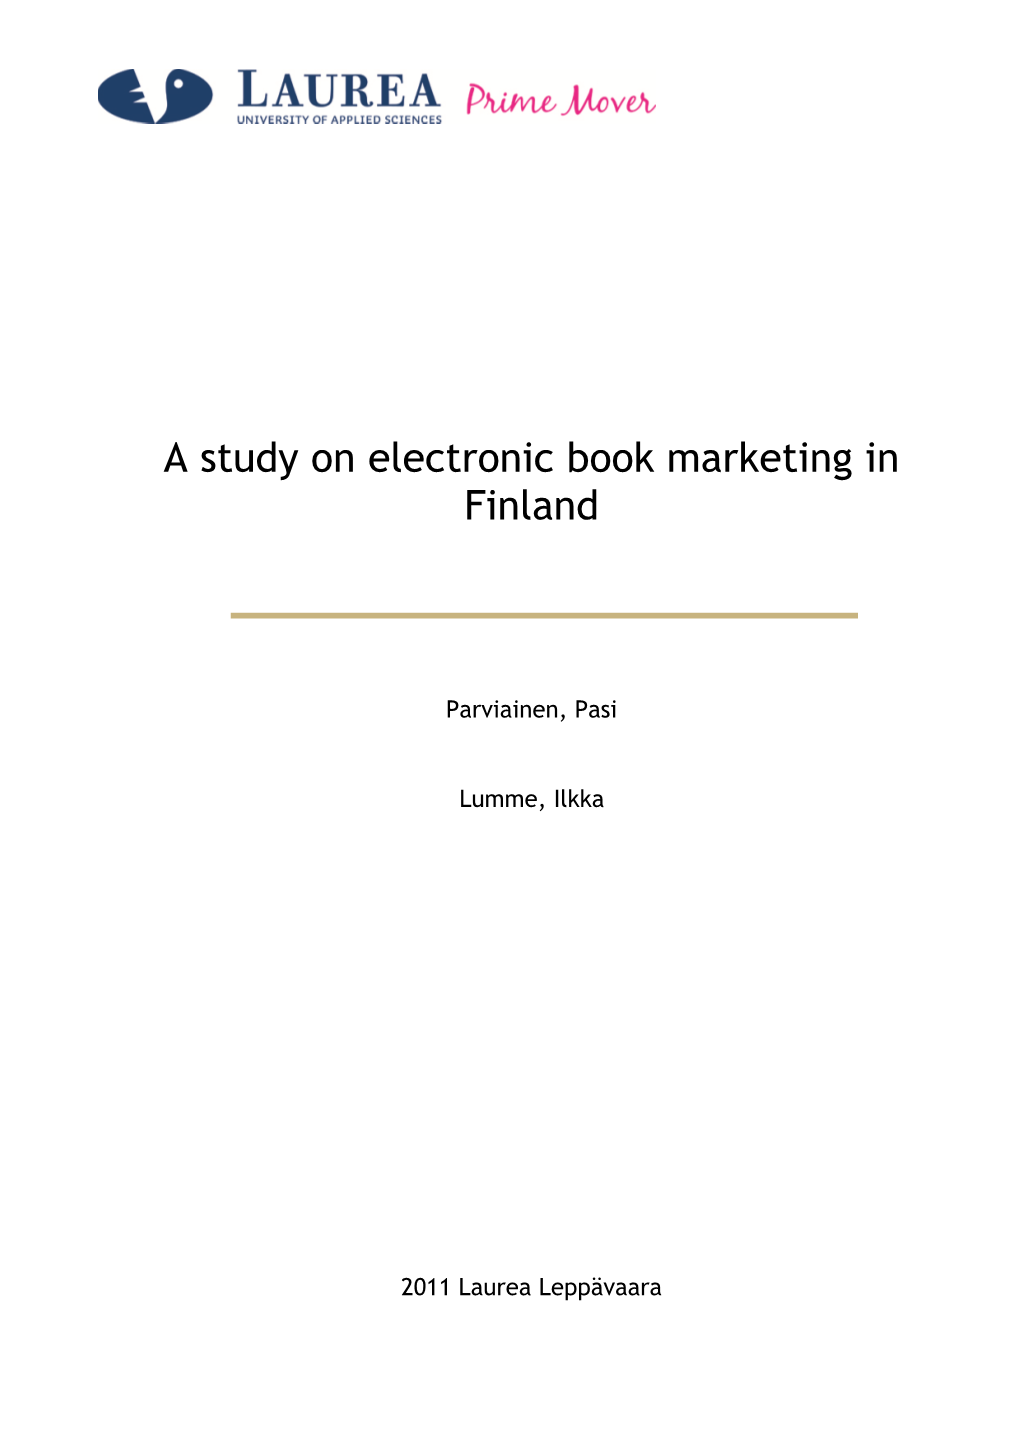 A Study on Electronic Book Marketing in Finland